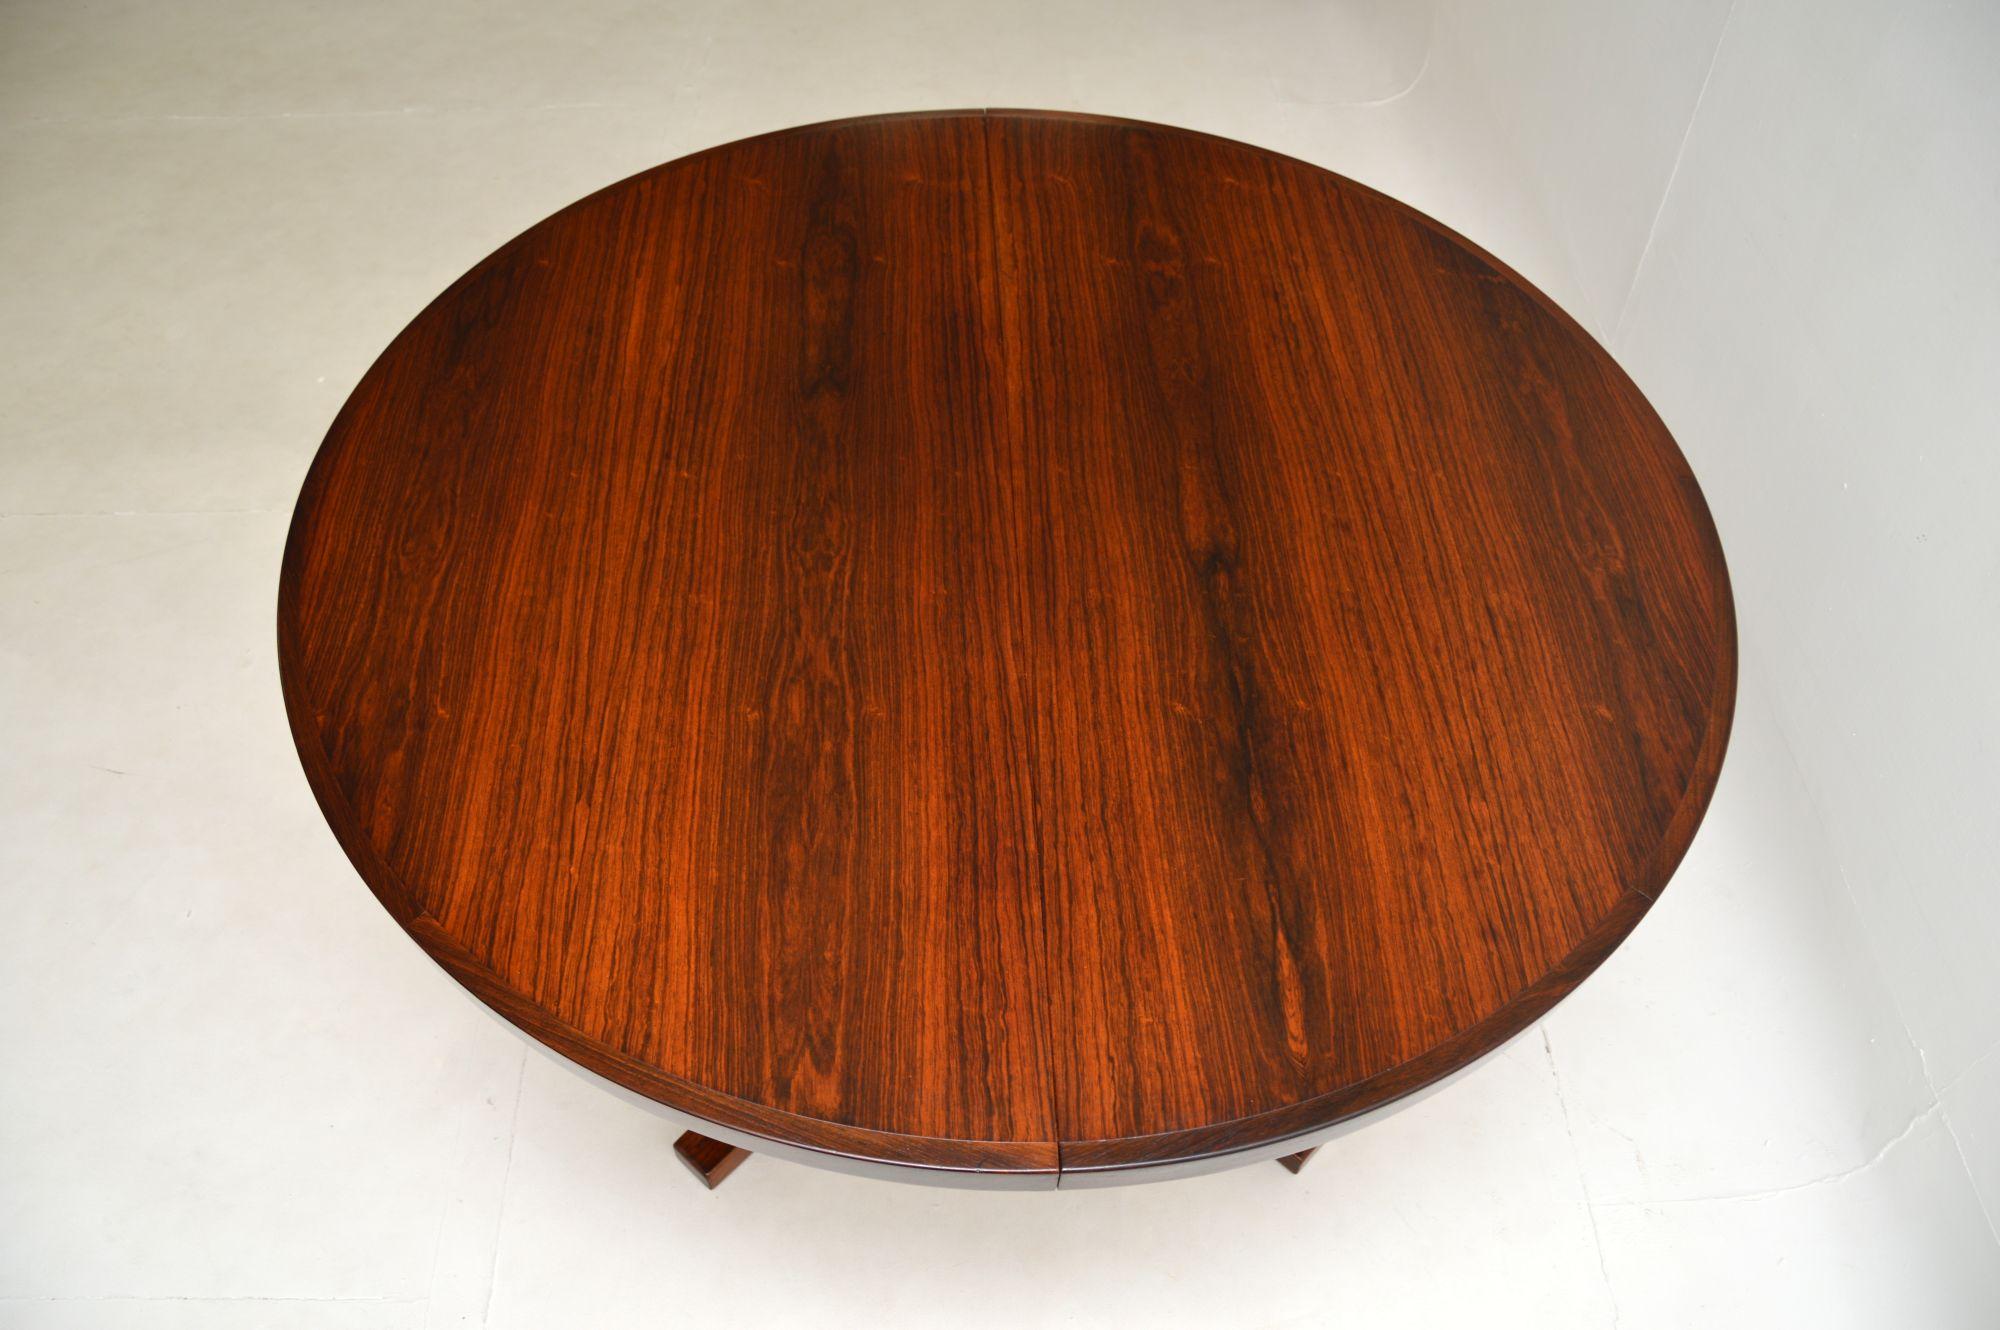 A stylish and extremely well made Danish vintage dining table by John Mortensen, dating from the 1960’s.

This is of exceptional quality, the large round circular top can seat six comfortably. This is an extending table that comes with two leaves,